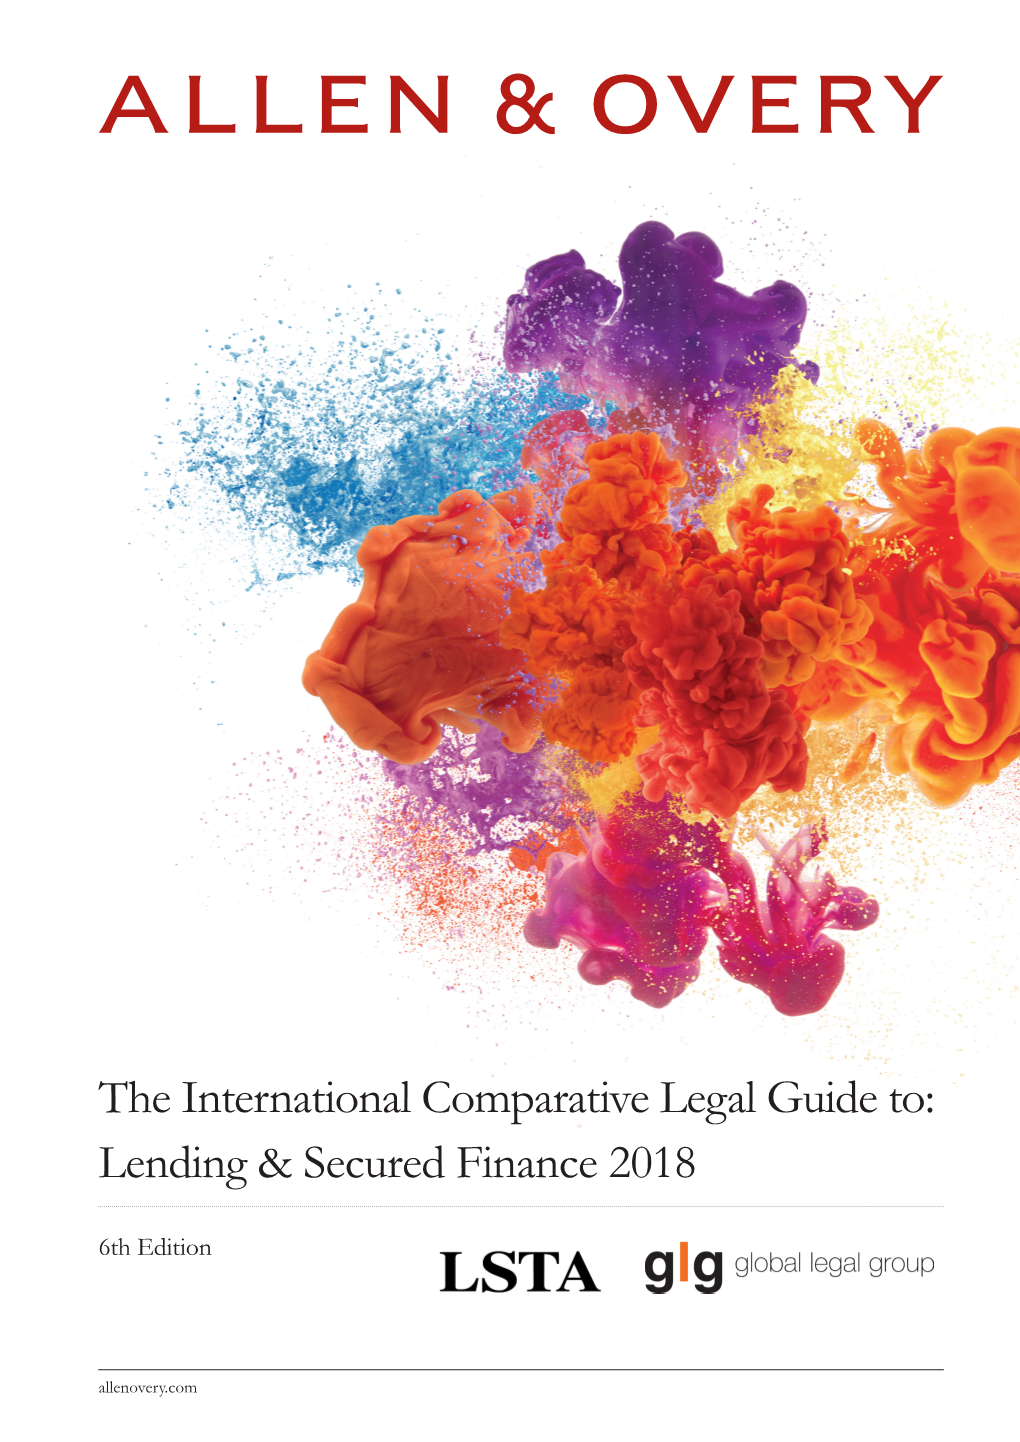 The International Comparative Legal Guide To: Lending & Secured